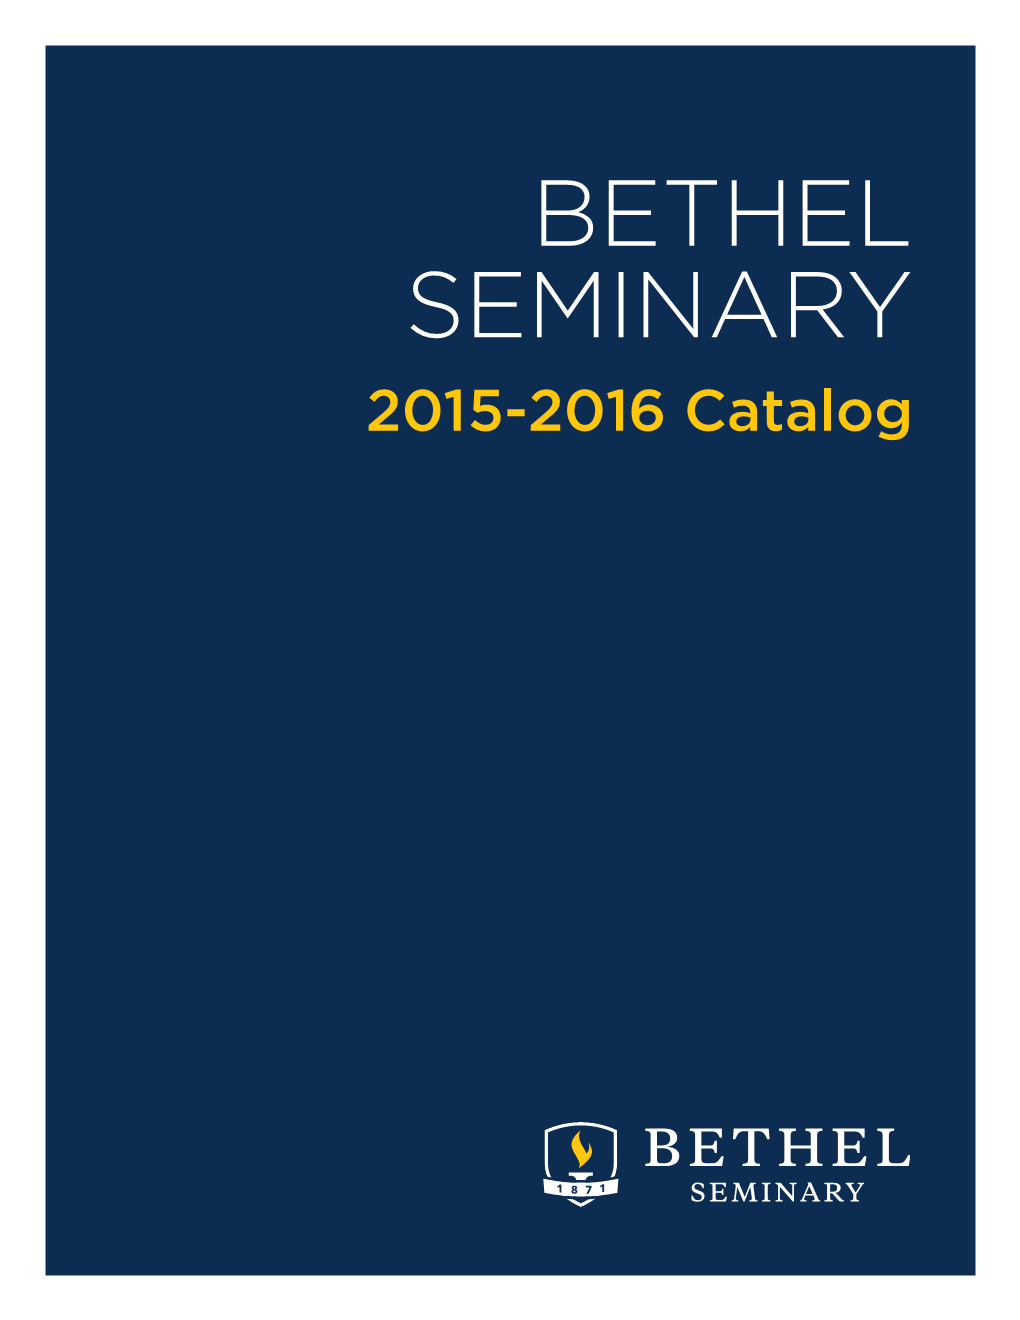 BETHEL SEMINARY 2015-2016 Catalog the Master of Arts in Children's and Family Ministry